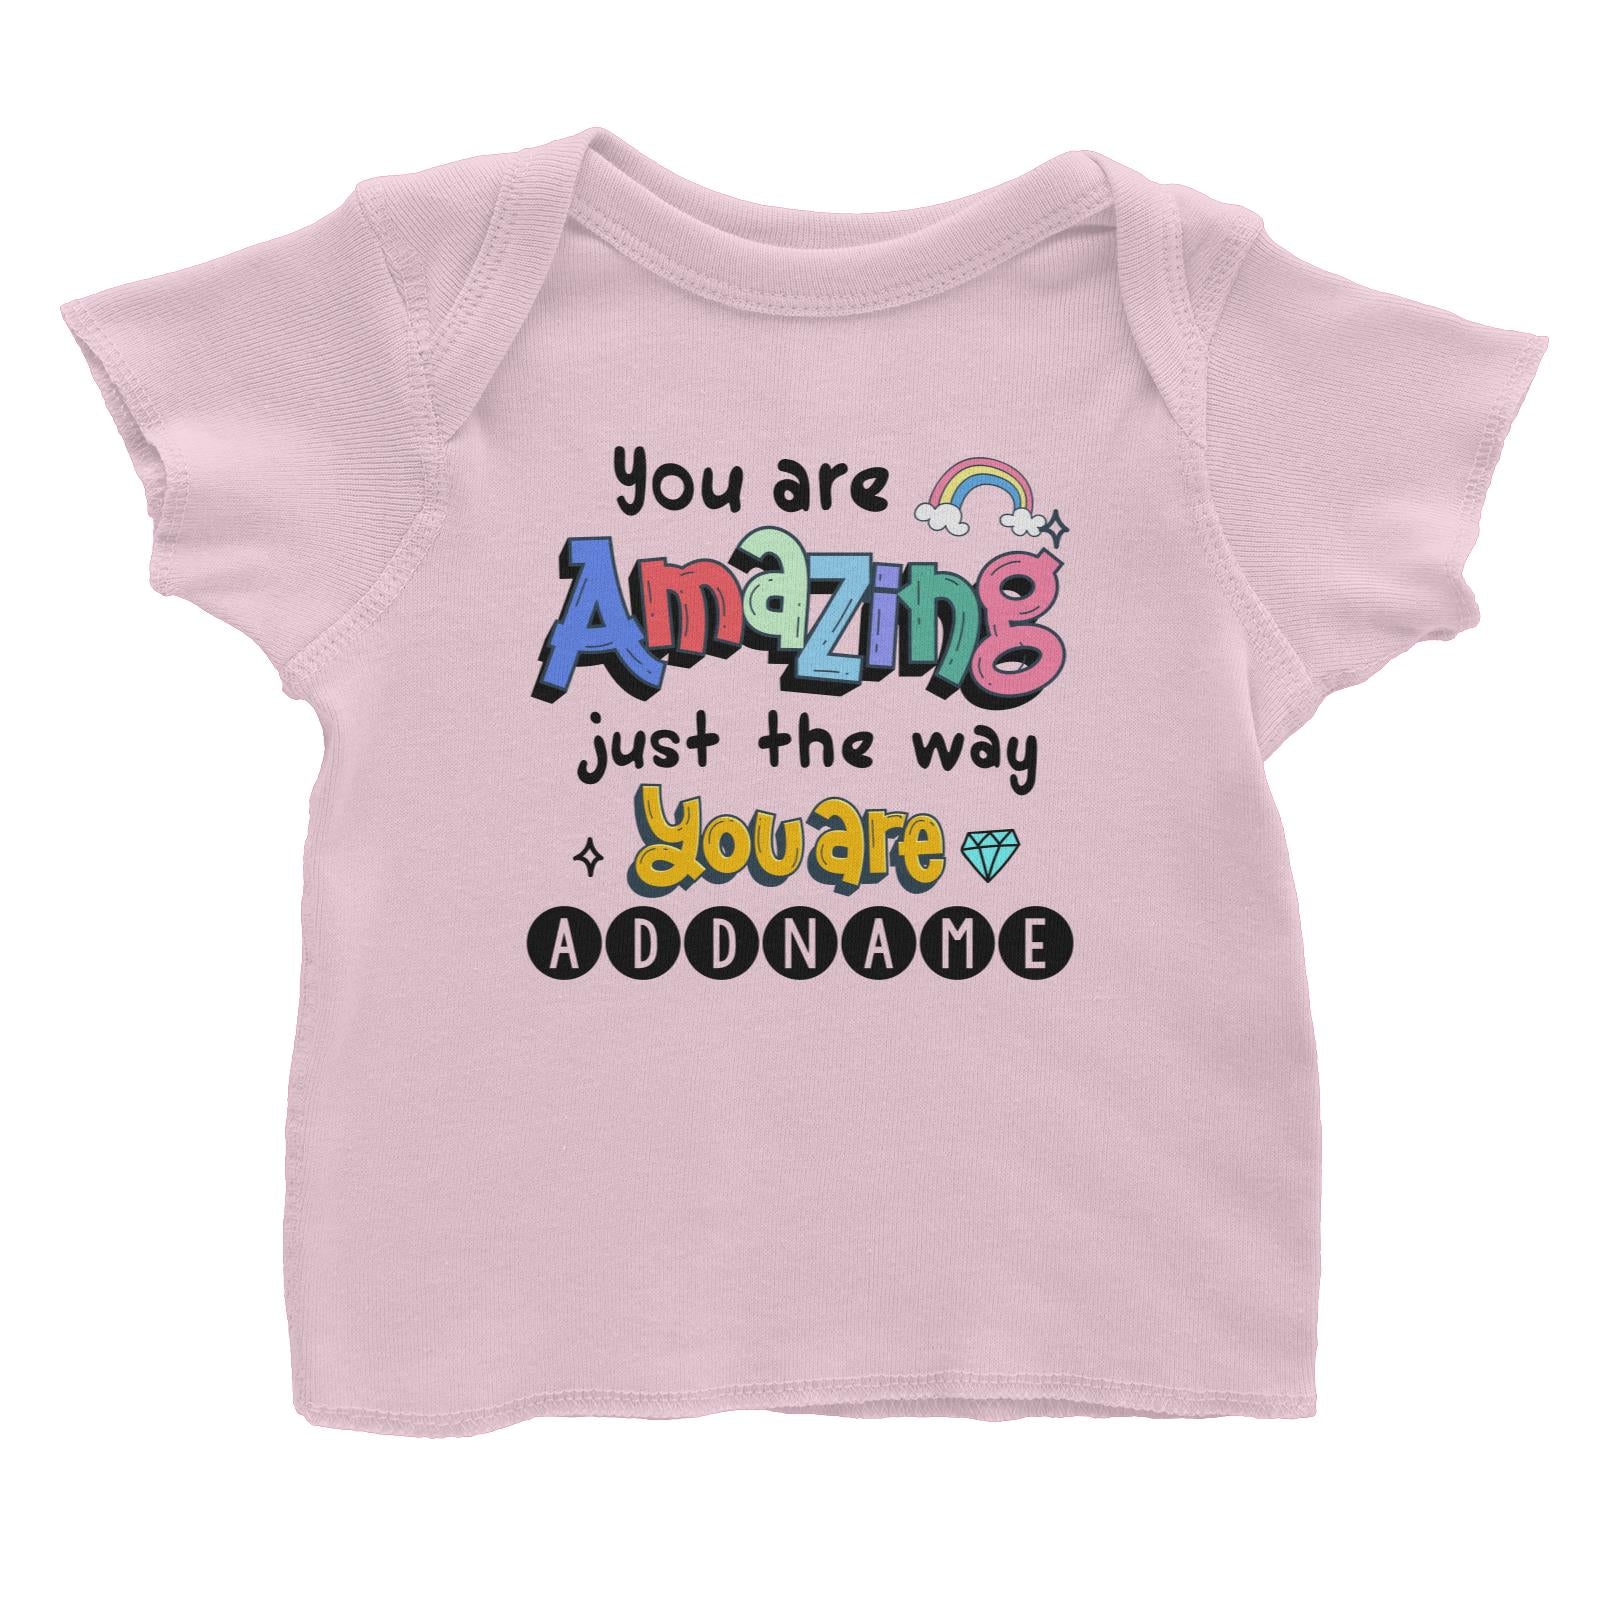 Children's Day Gift Series You Are Amazing Just The Way You Are Addname Baby T-Shirt